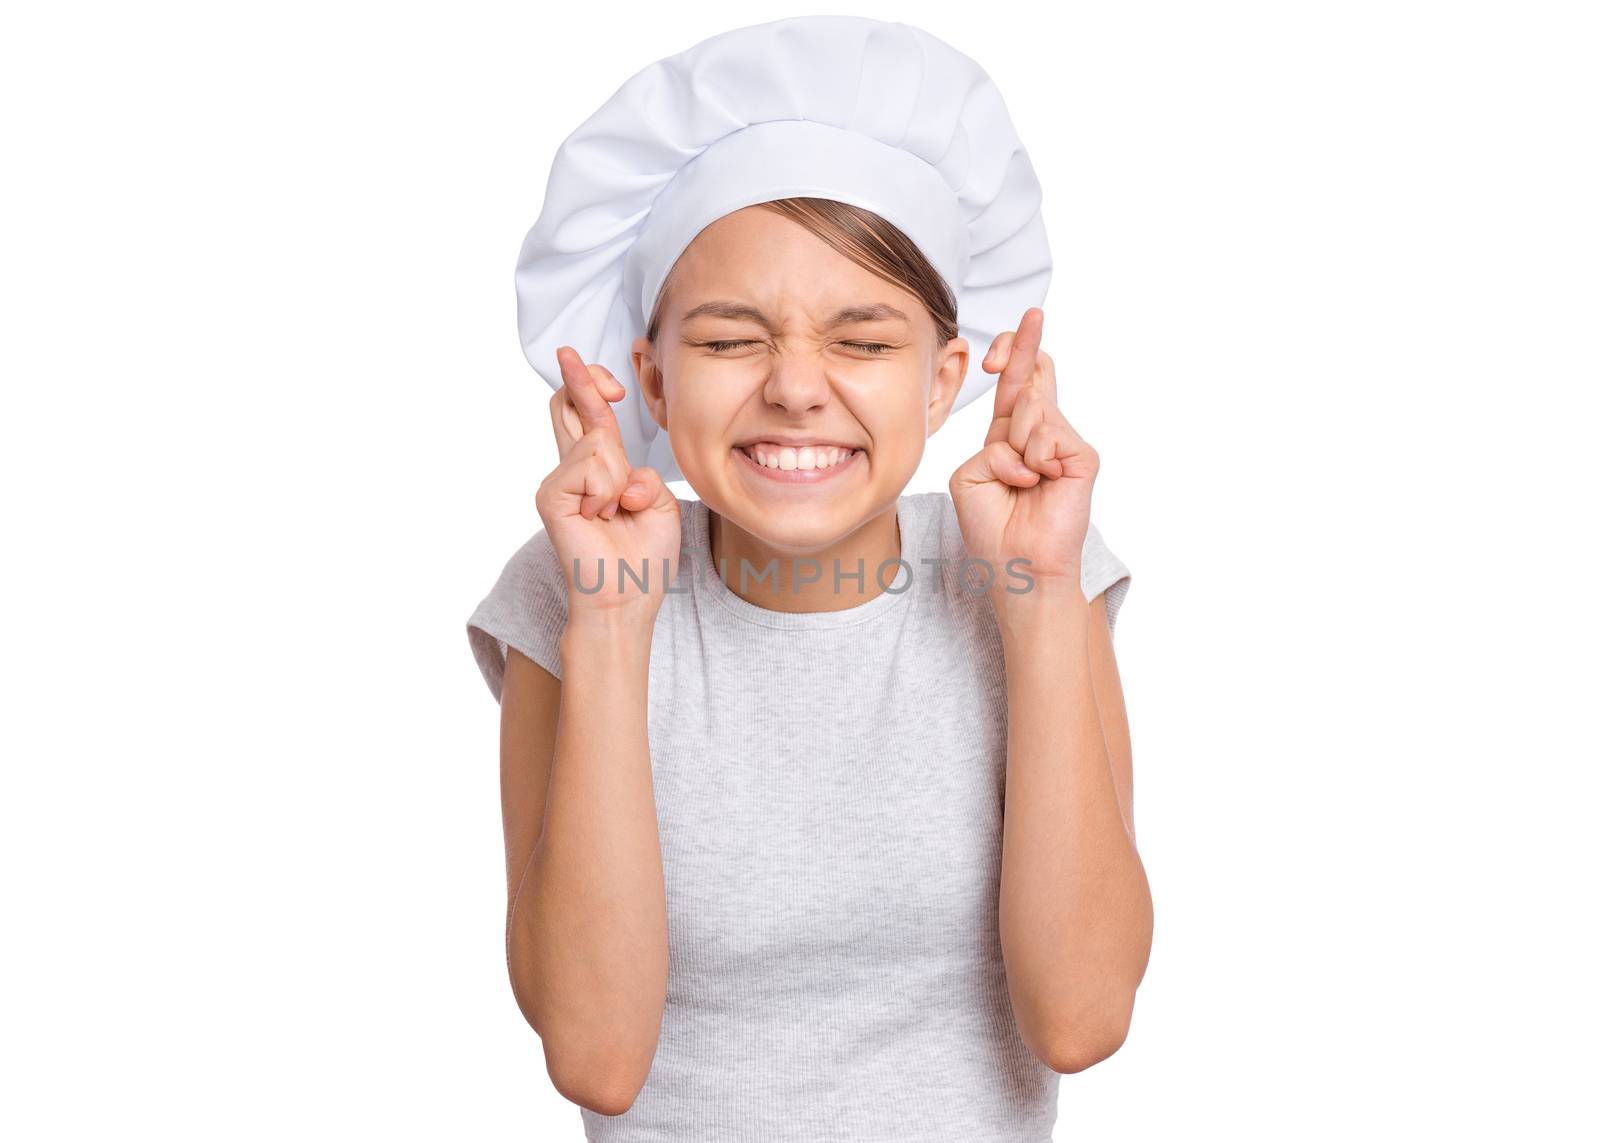 Teen girl in chef hat, keeping fingers crossed and making wish, isolated on white background.